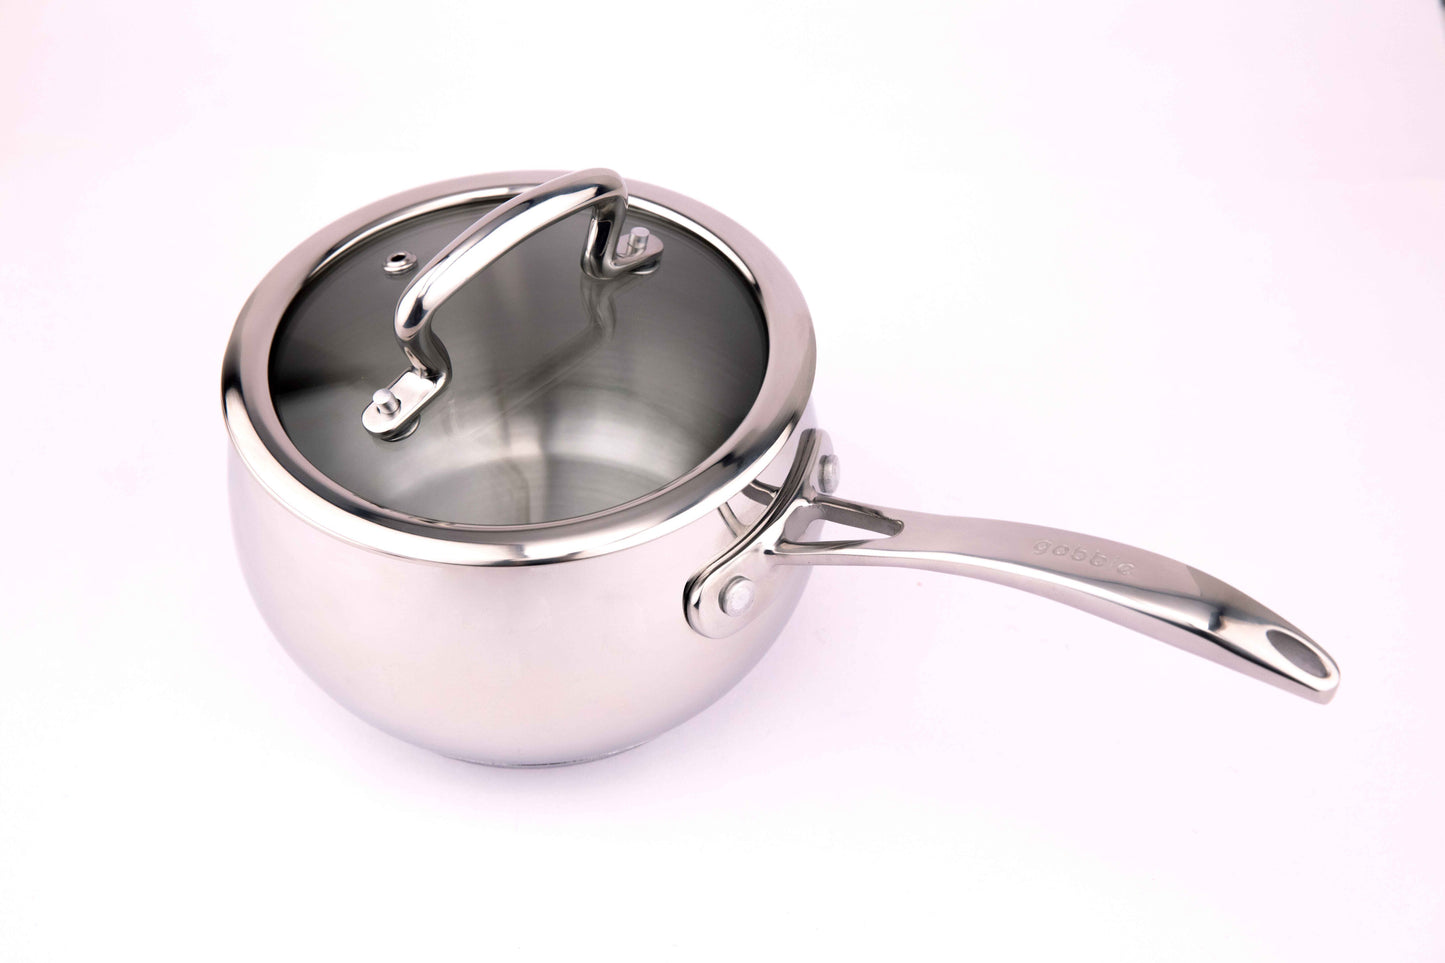 Gobble Impact Bonded Stainless Steel Belly Sauce Pan with Glass Lid Sauce Pan diameter with Lid 1 L capacity